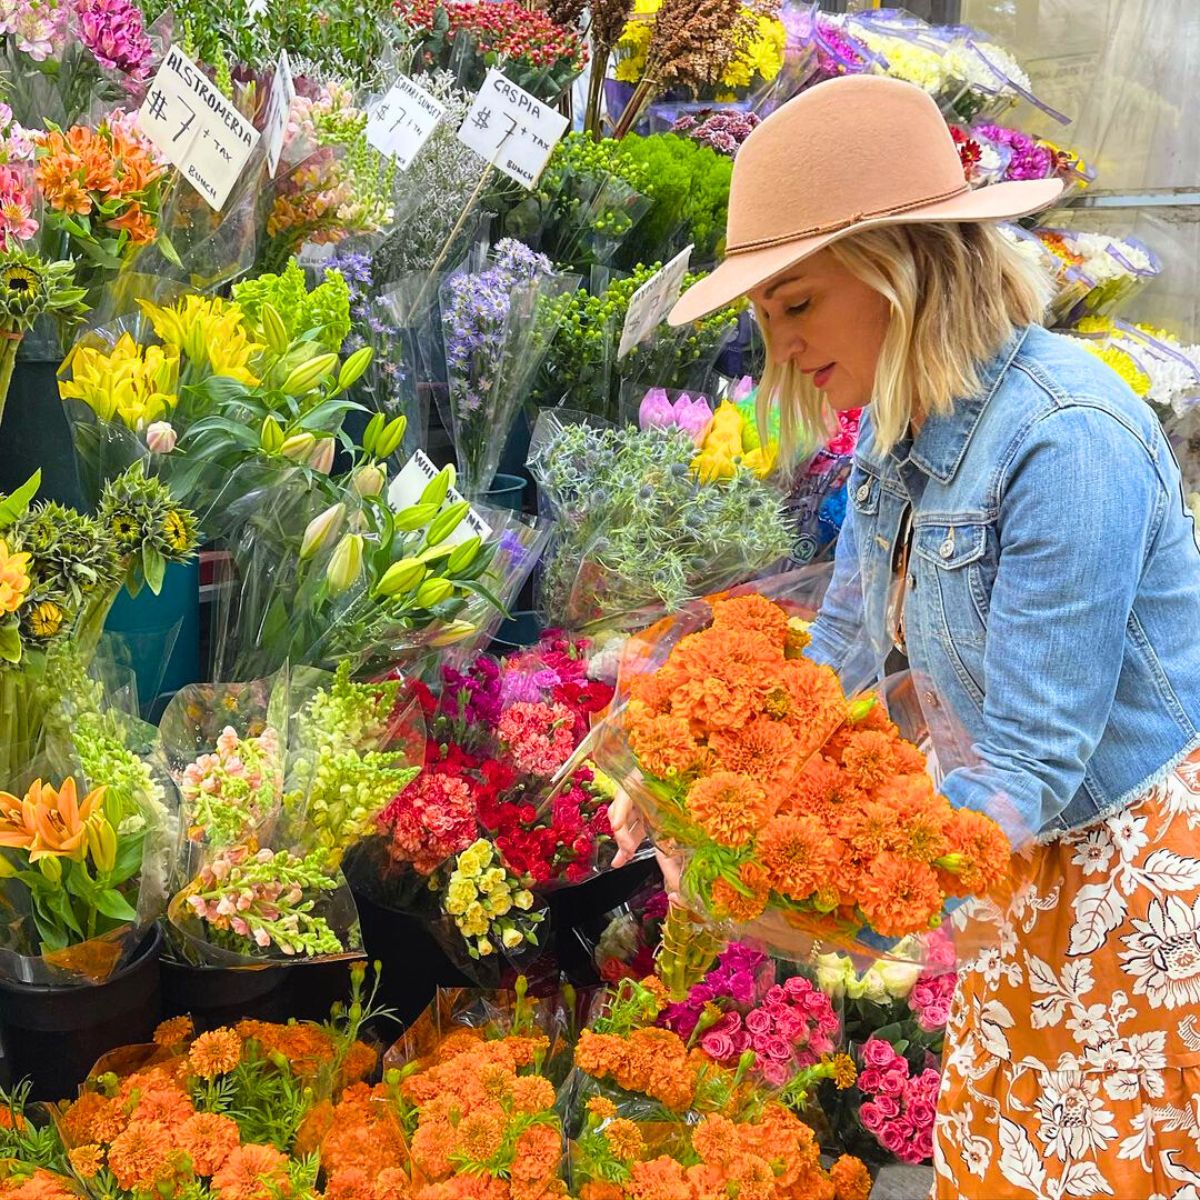 Buying colorful flowers as self care